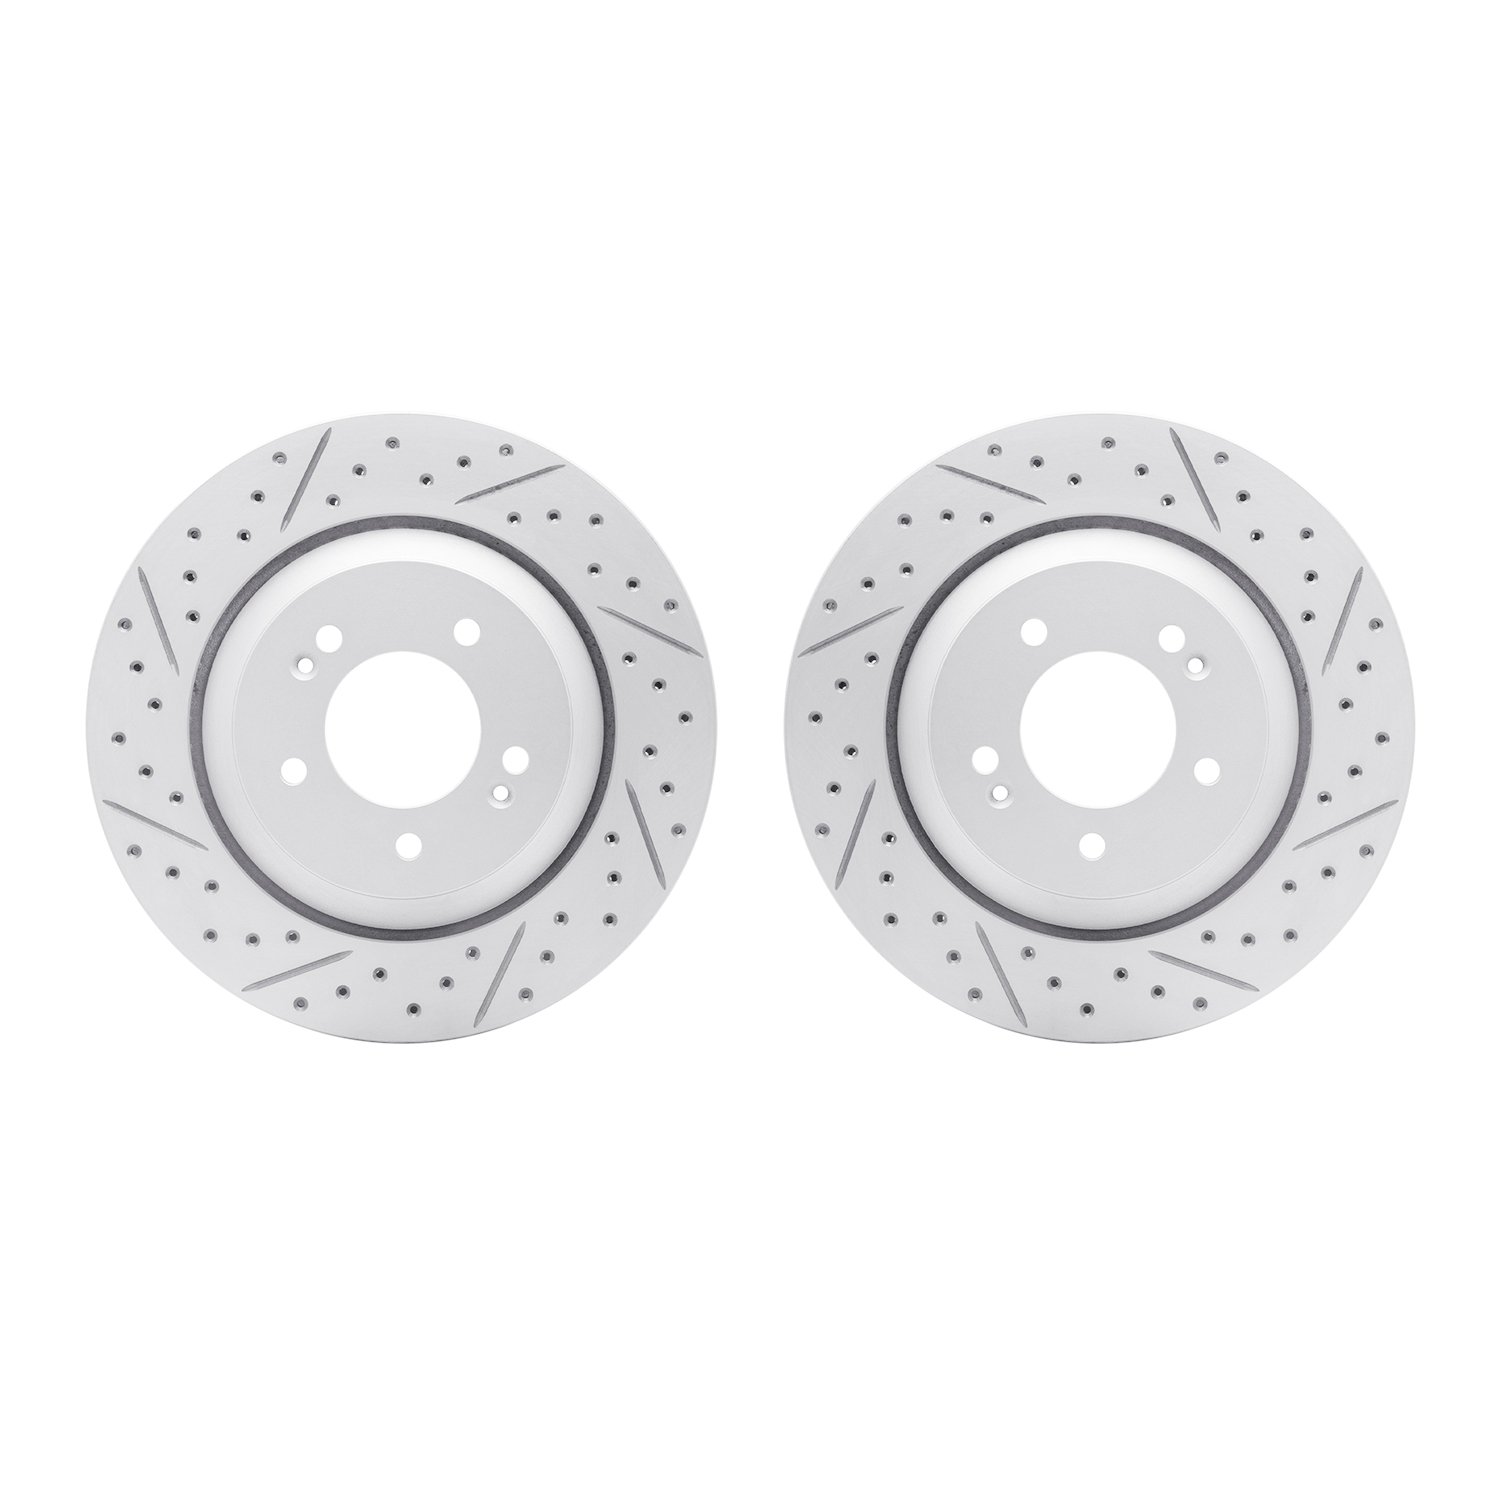 Geoperformance Drilled/Slotted Brake Rotors, Fits Select